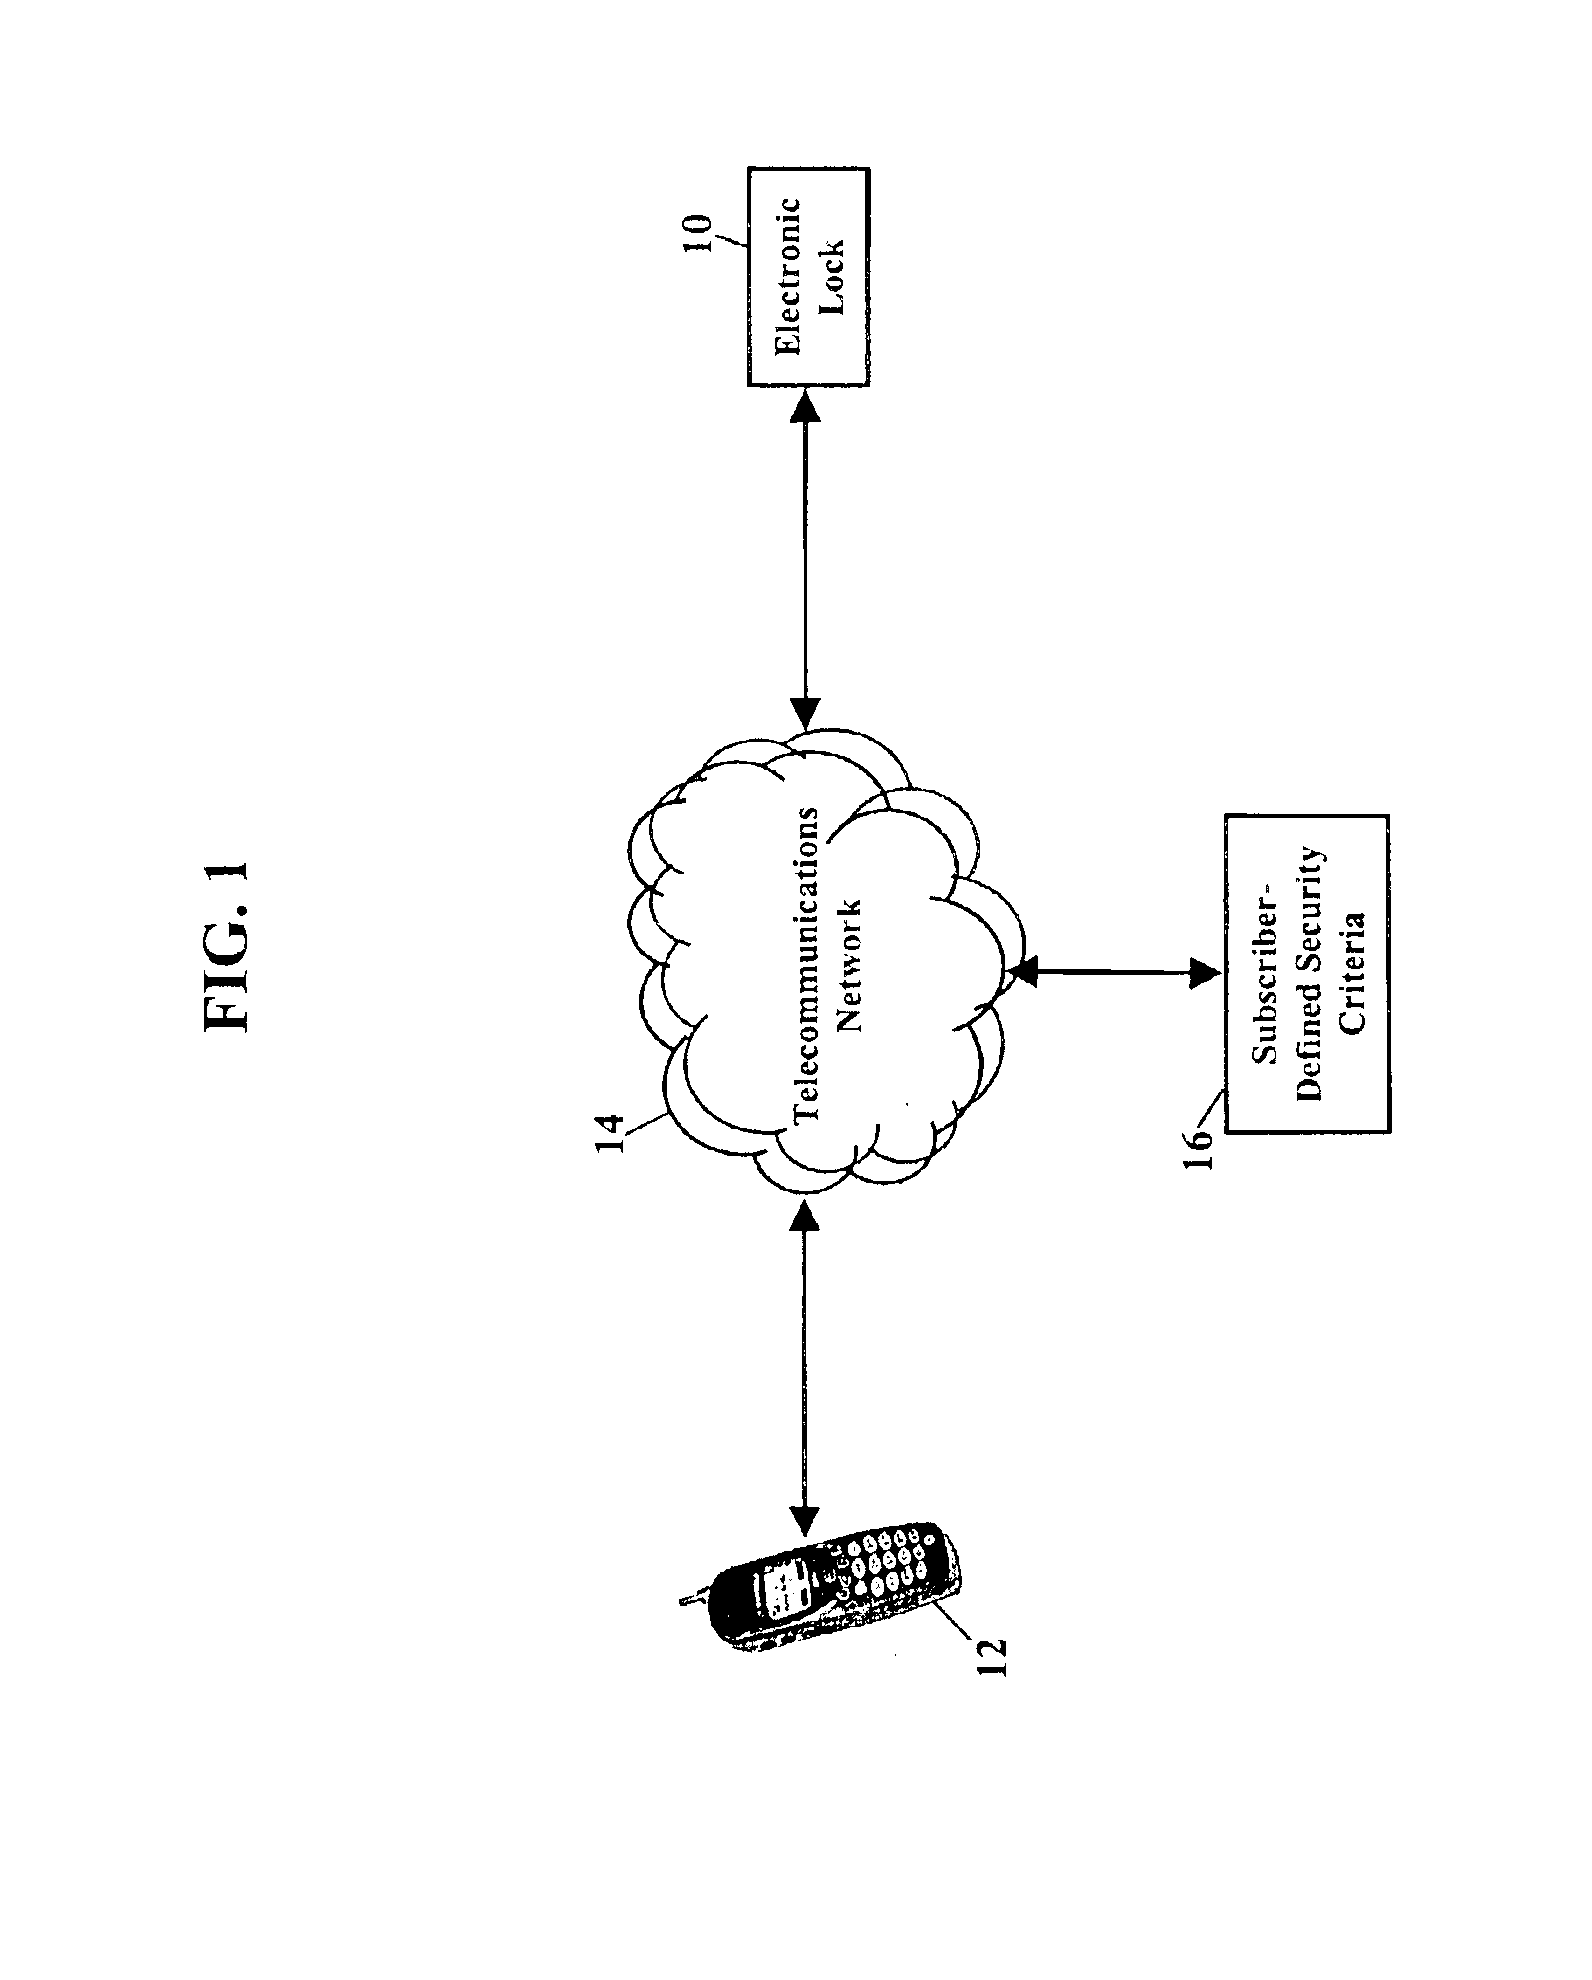 Activation of electronic lock using telecommunications network